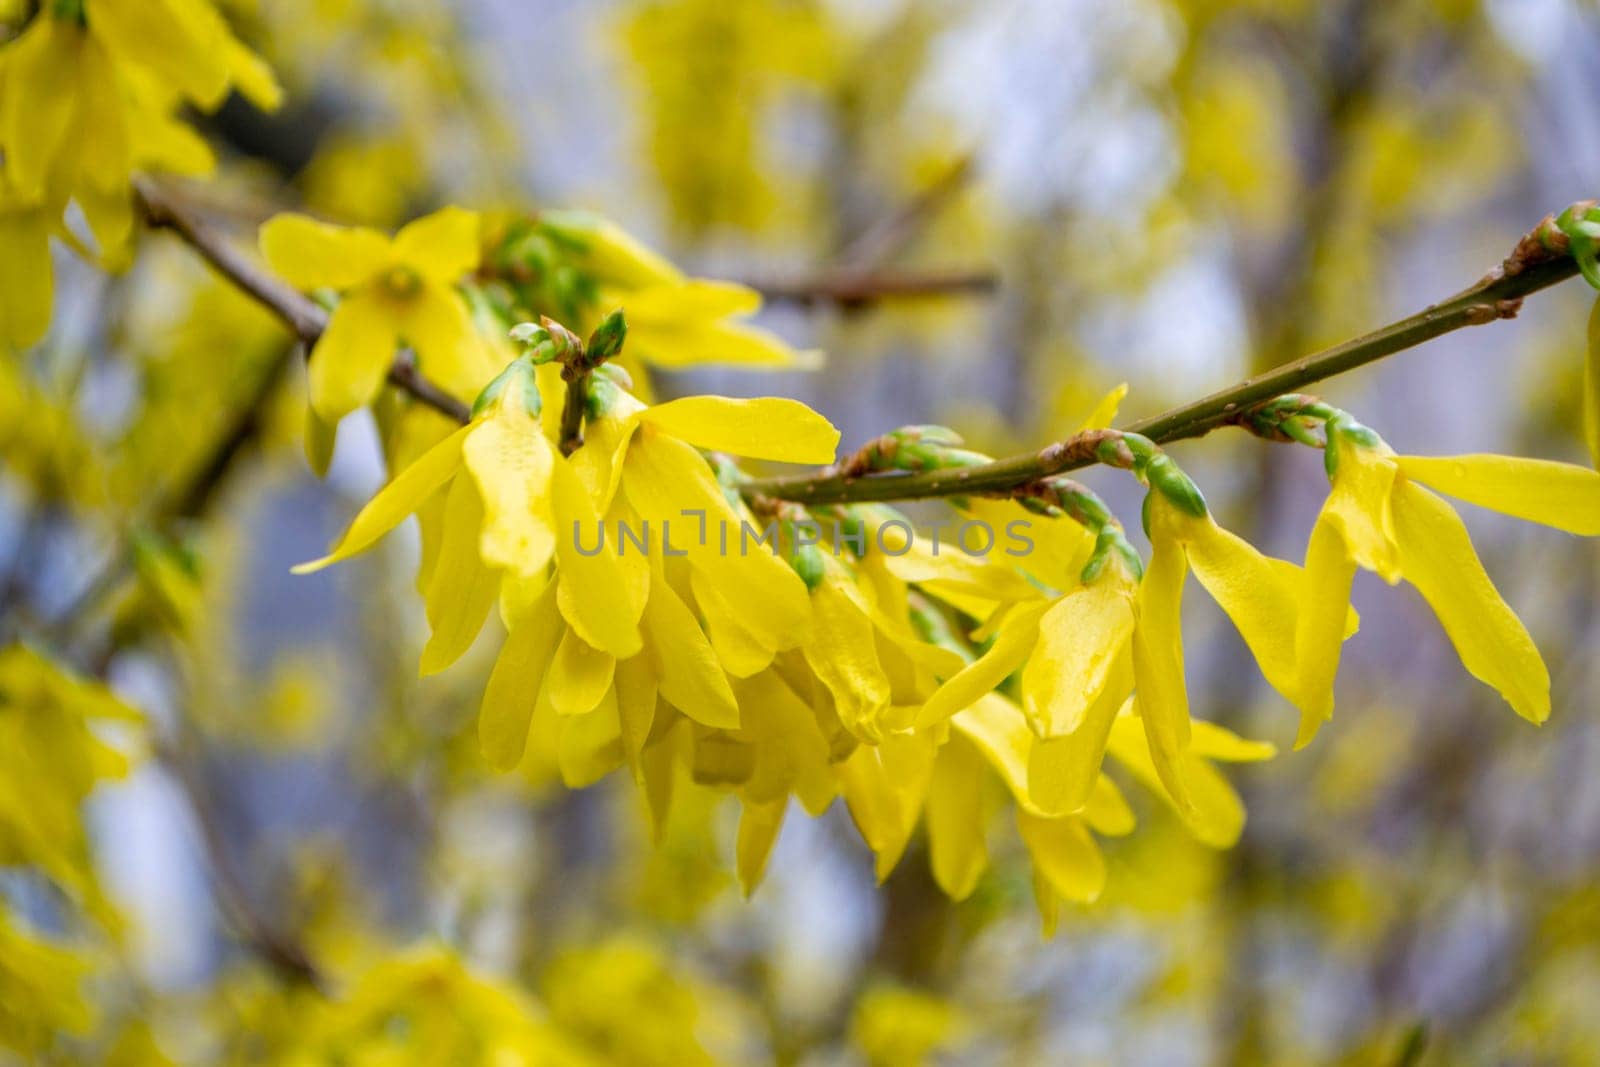 Fields planted with corn. green corn sprouts in a field at a ranch. A branch of a forsythia tree with yellow flowers. High quality photo